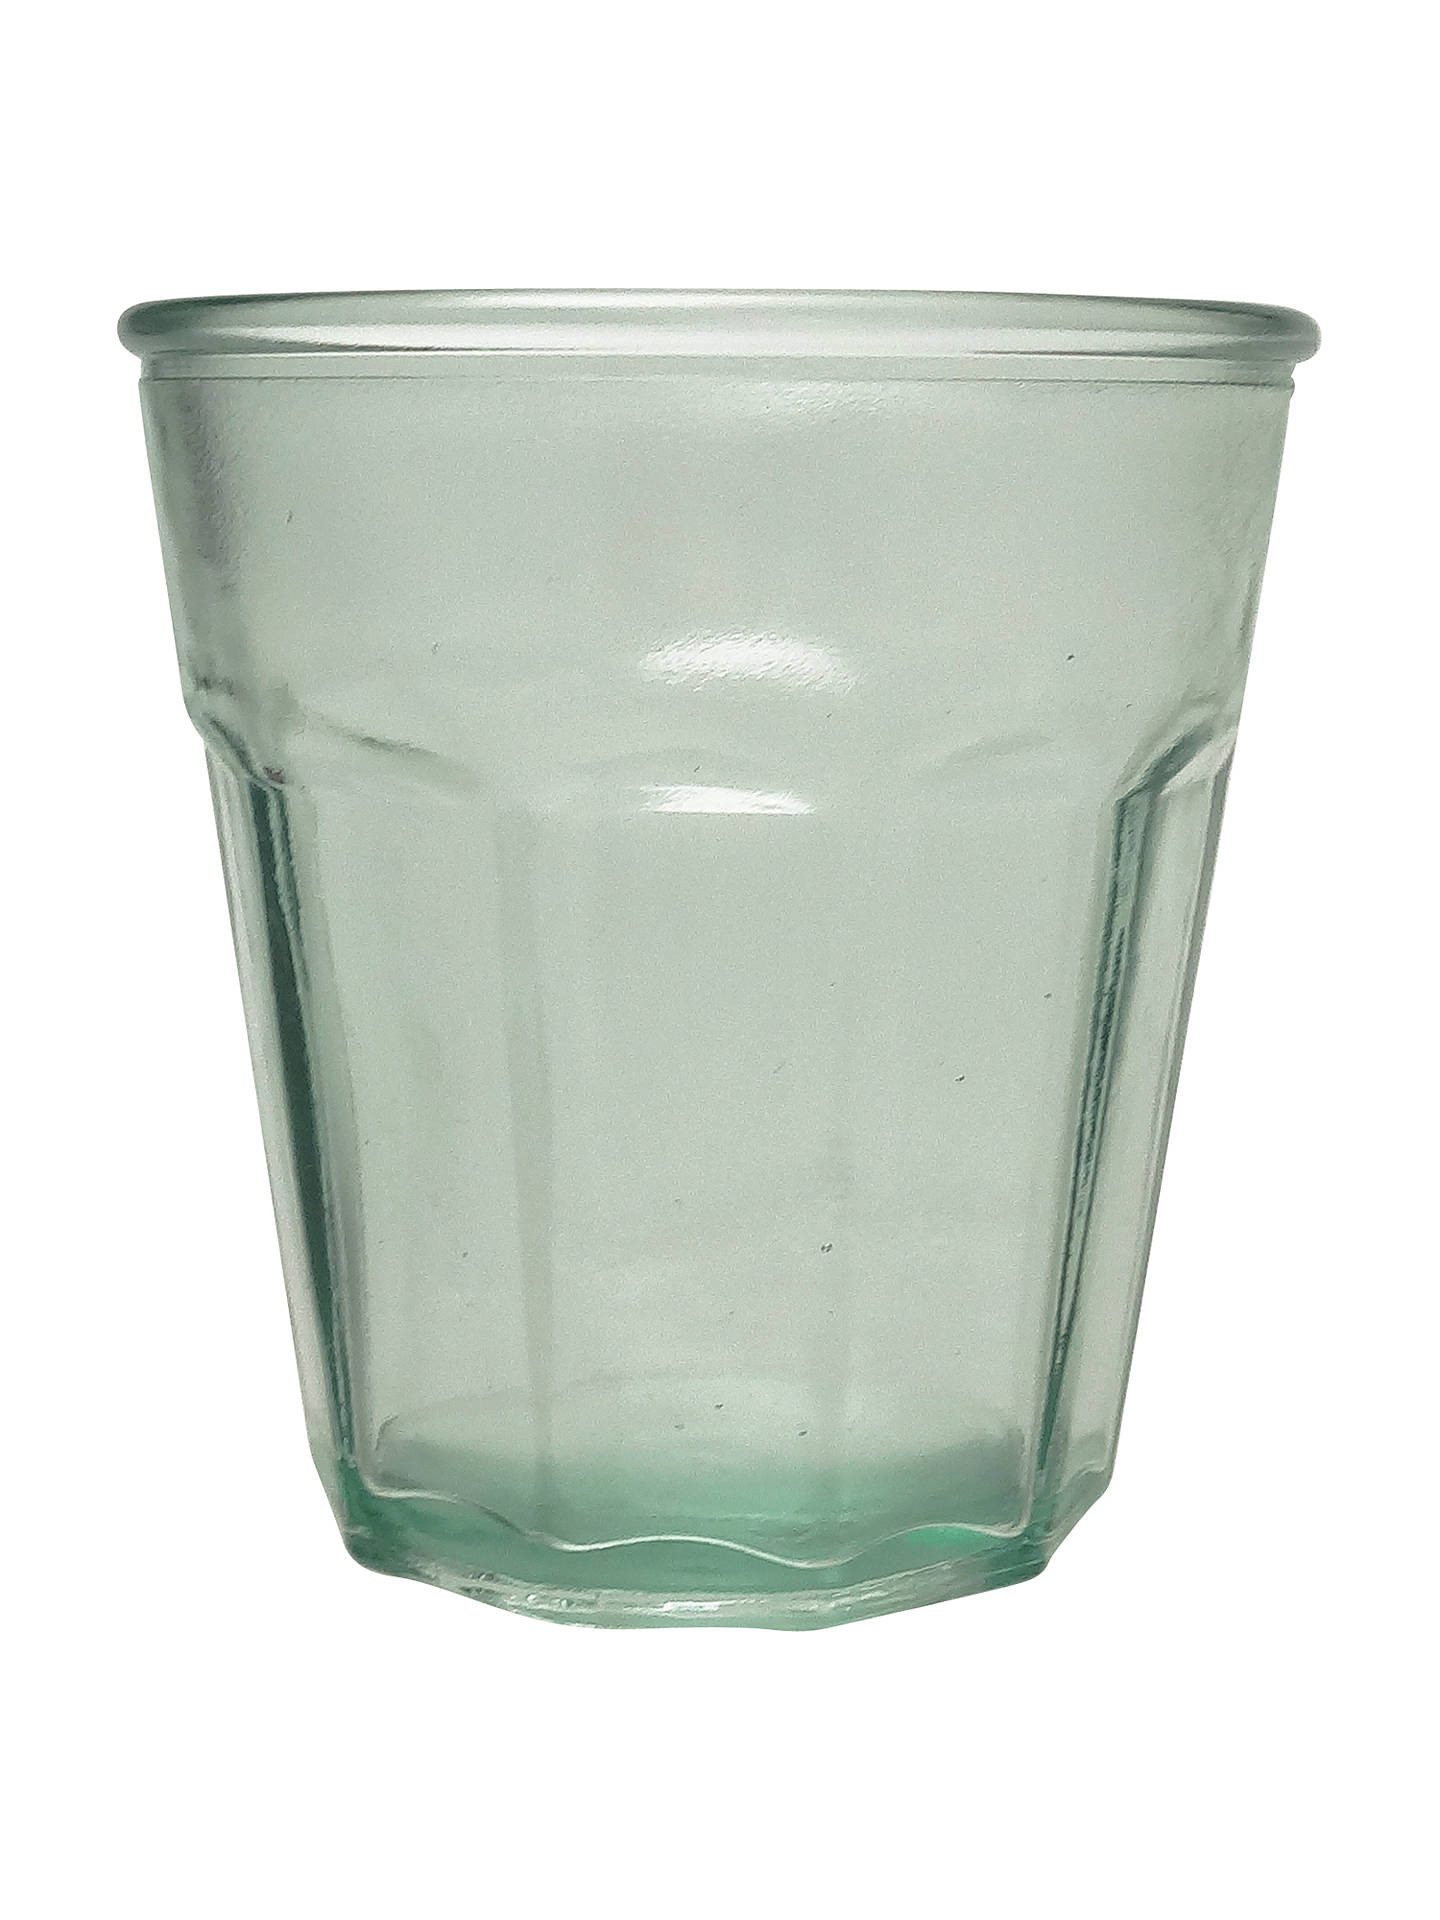 vidrios san miguel vase of vidrios san miguel recycled glass tumbler clear small 250ml at for buyvidrios san miguel recycled glass tumbler clear small 250ml online at johnlewis com